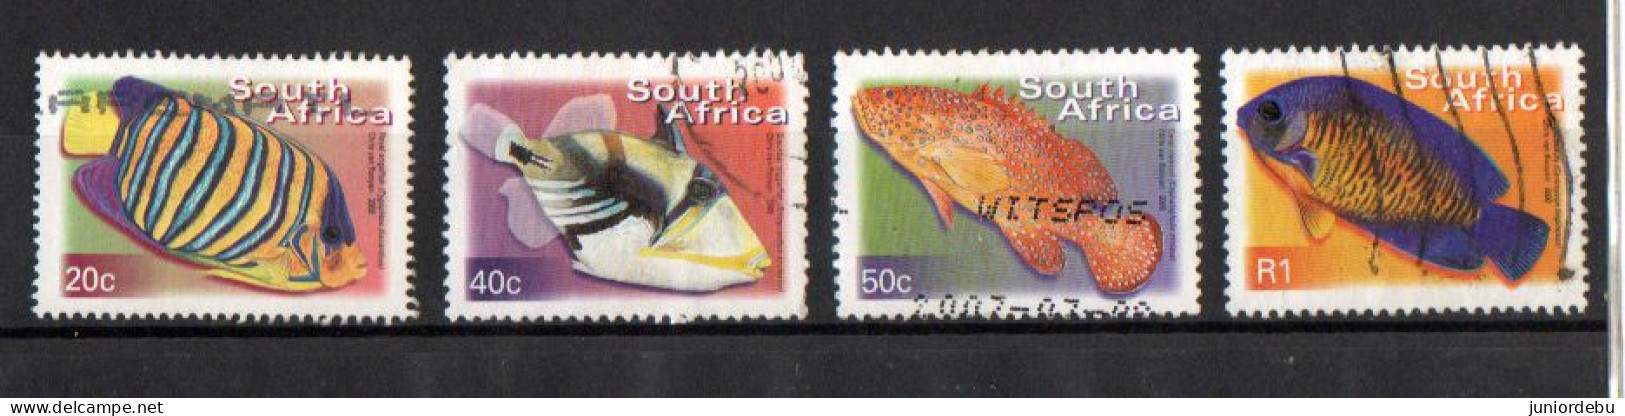 South Africa - 2000 -  Fauna And Flora - Fish  - Used. - Usati